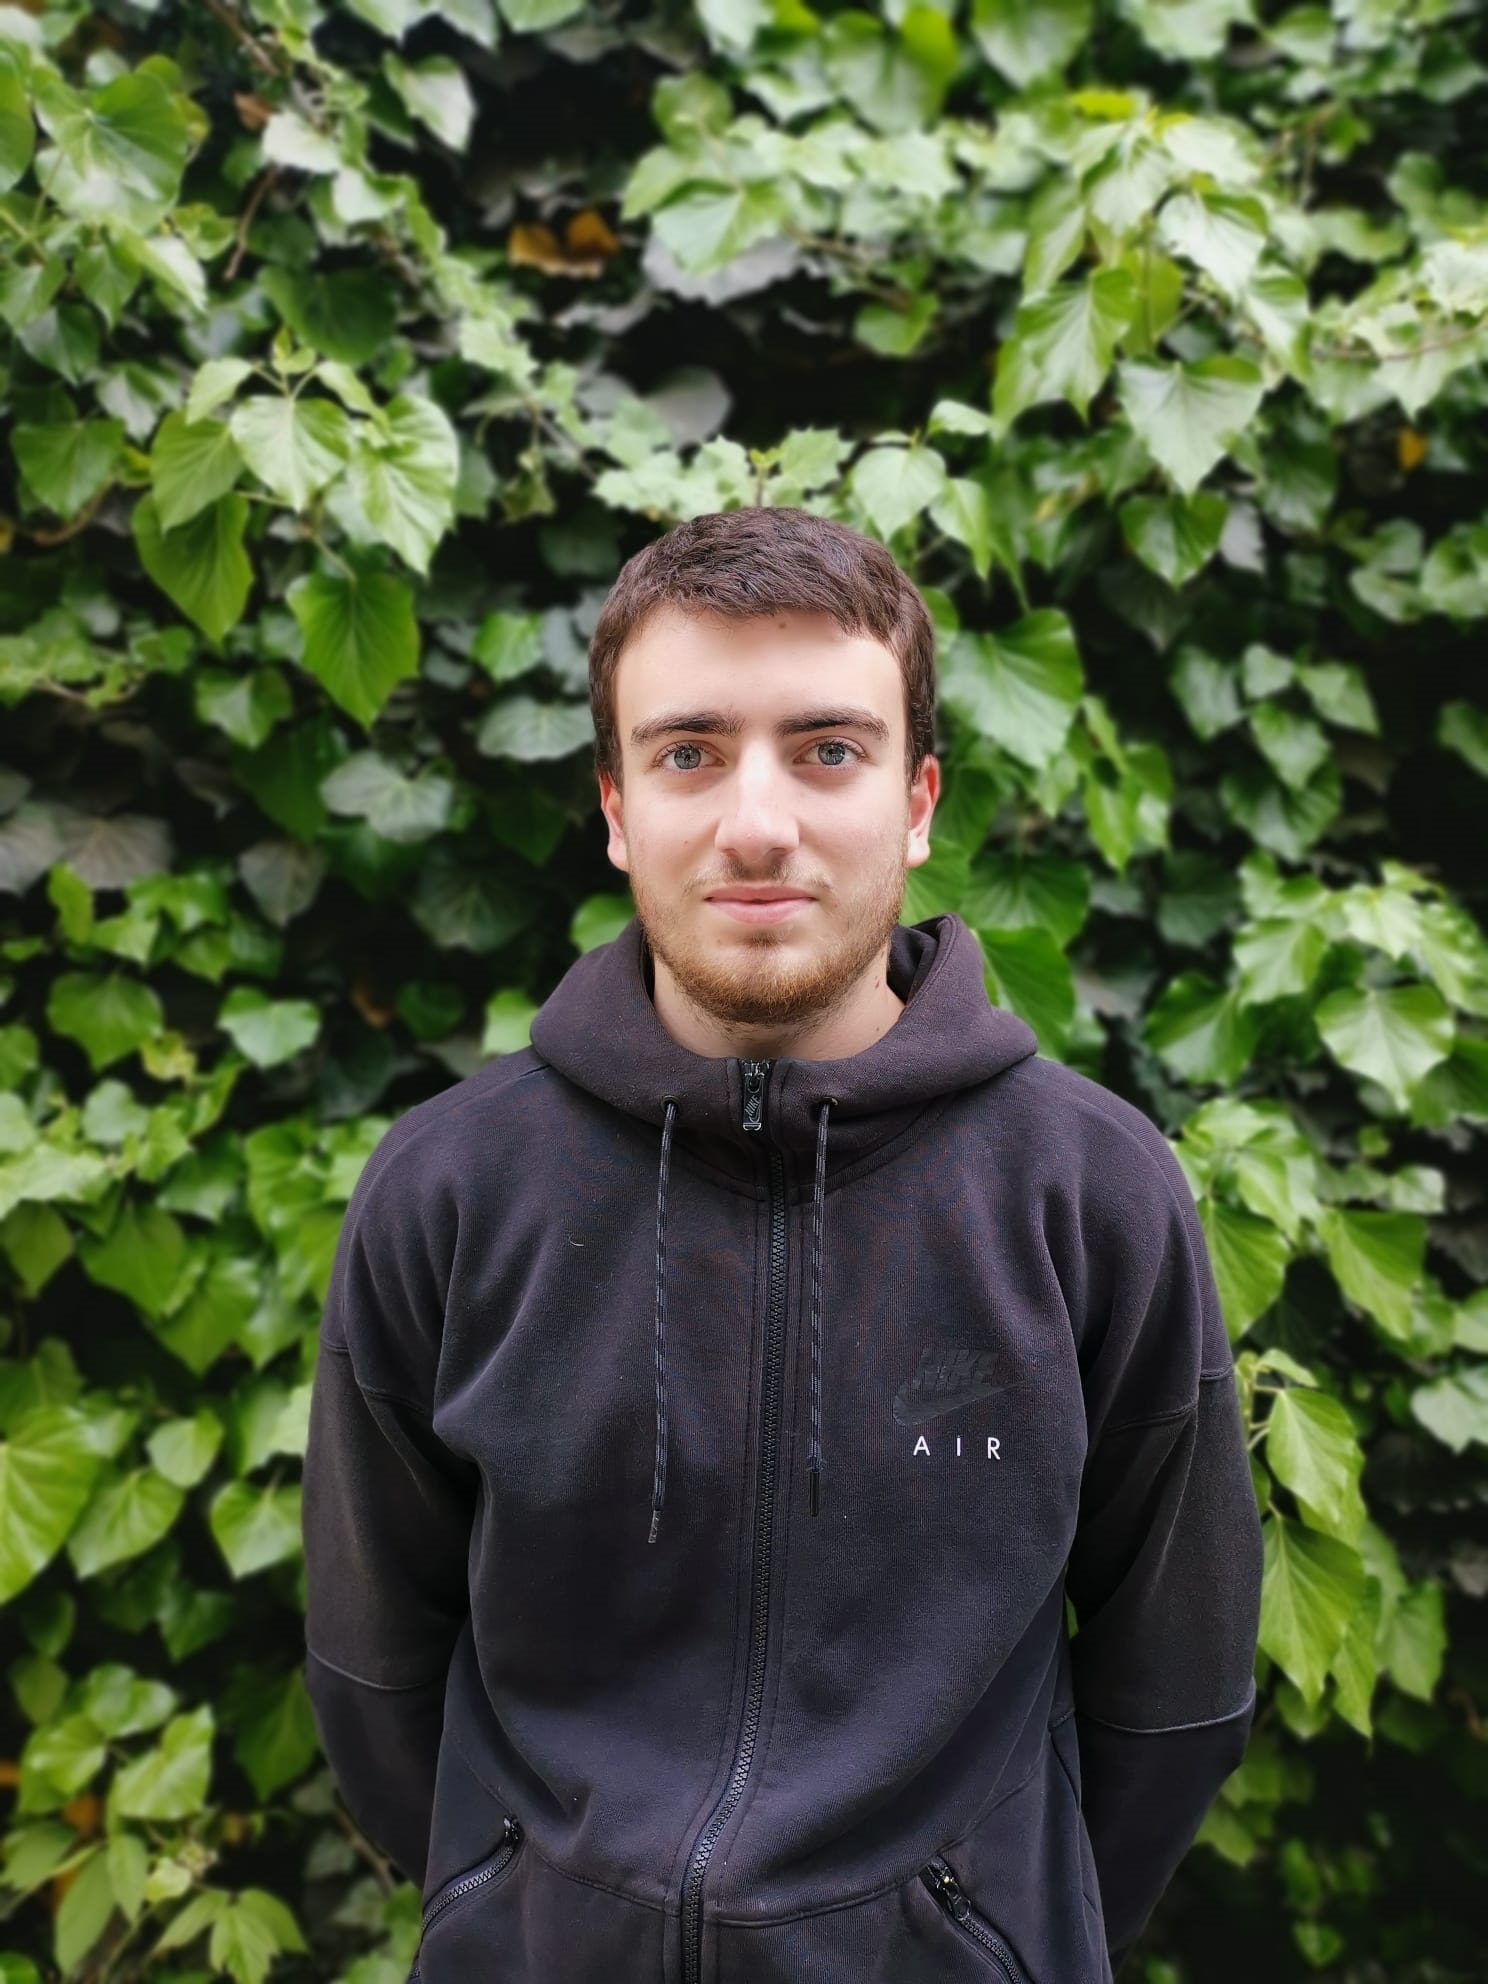 You are currently viewing Meet Joaquim, our new volunteer from France